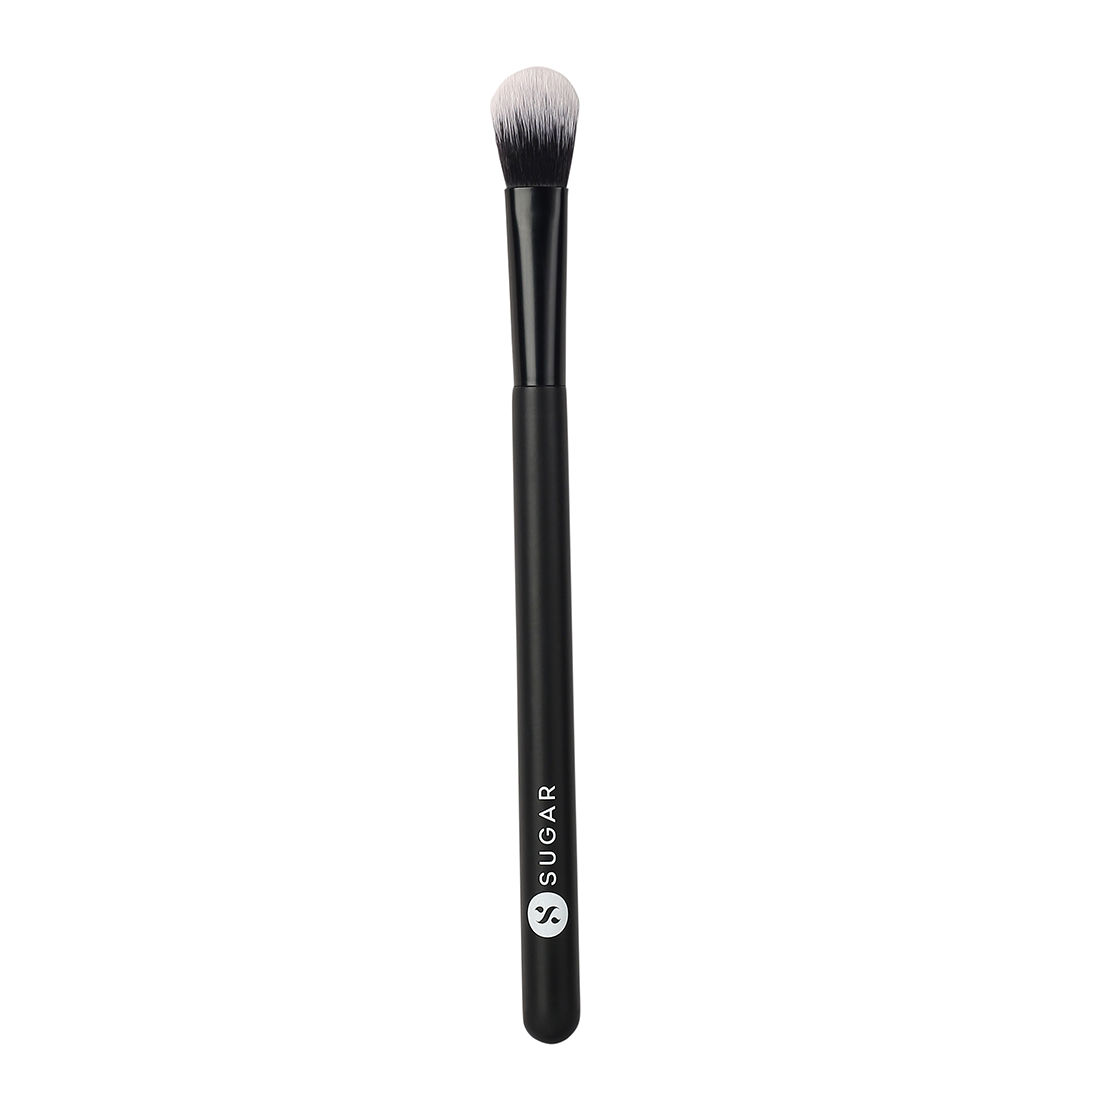 Buy SUGAR Cosmetics - Blend Trend - 006 Highlighter Brush (Brush For Easy Application of Highlighter) - Soft, Synthetic Bristles and Wooden Handle - Purplle